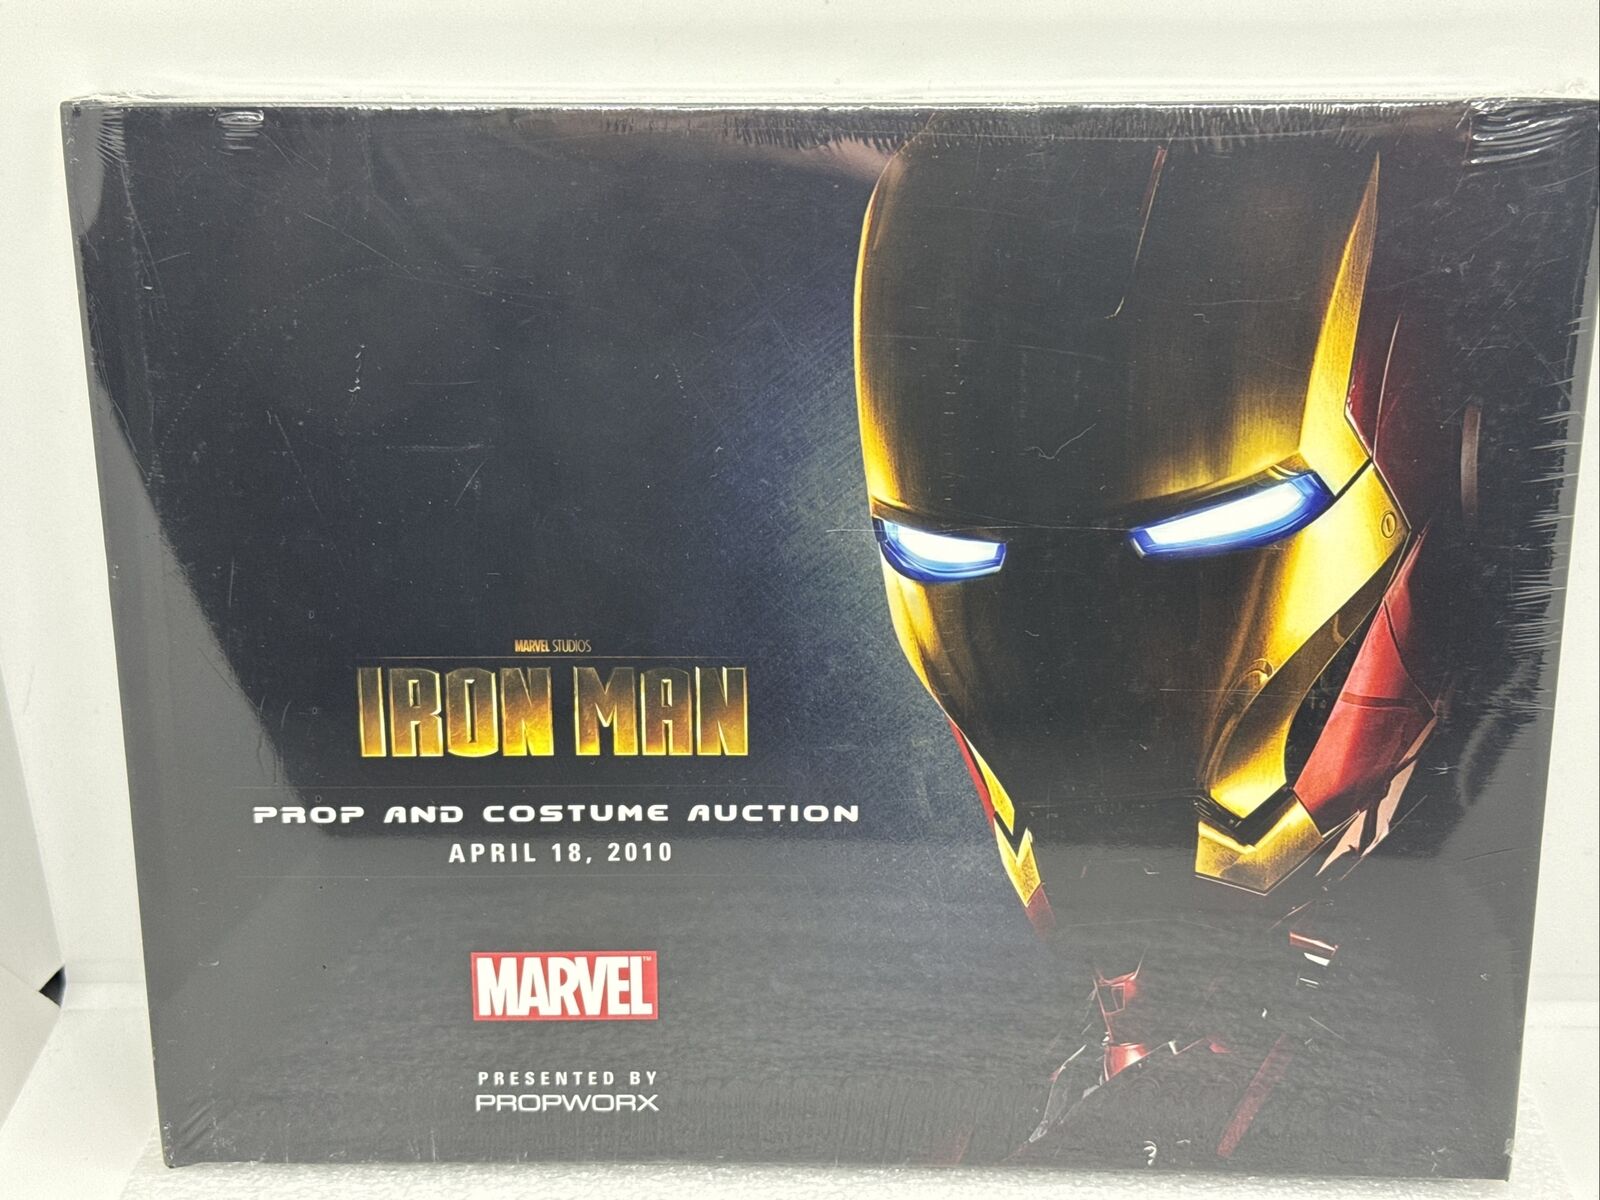 Iron Man Prop and Costume Auction Book By Propworx 2010 Hardcover Catalog Photos